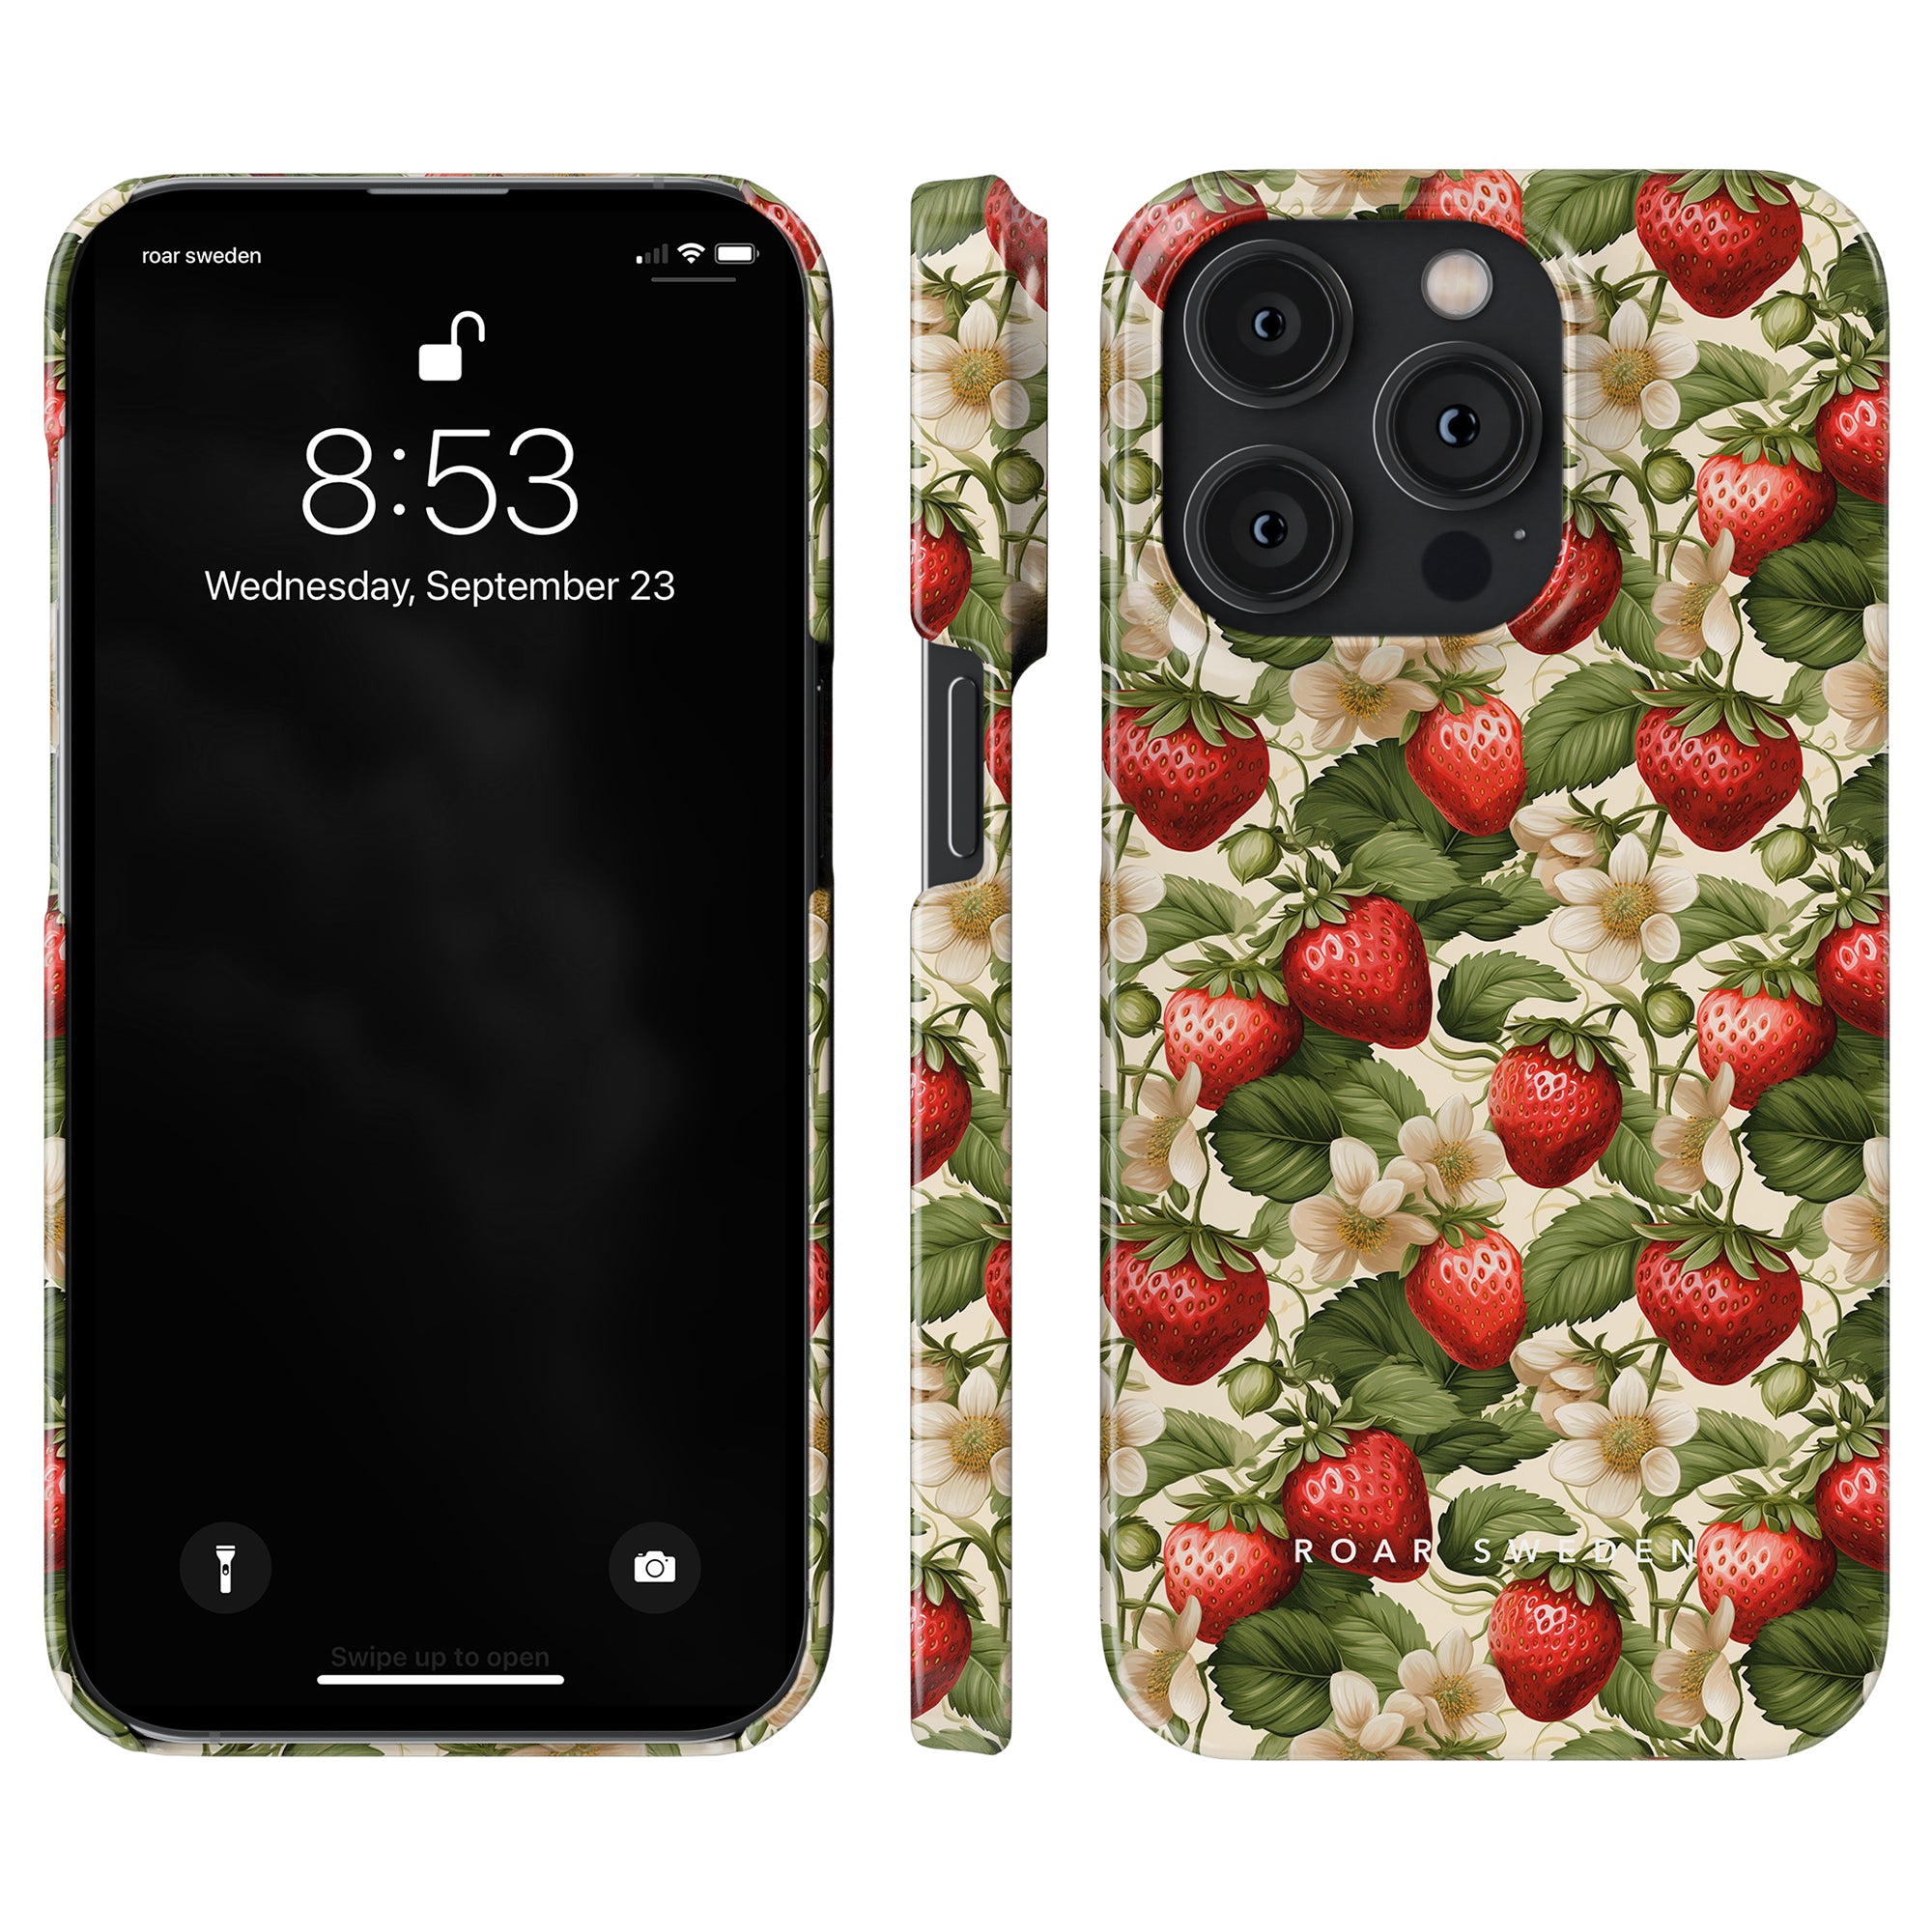 Smartphone with a Strawberries - Slim case featuring an integrated heart rate monitor.